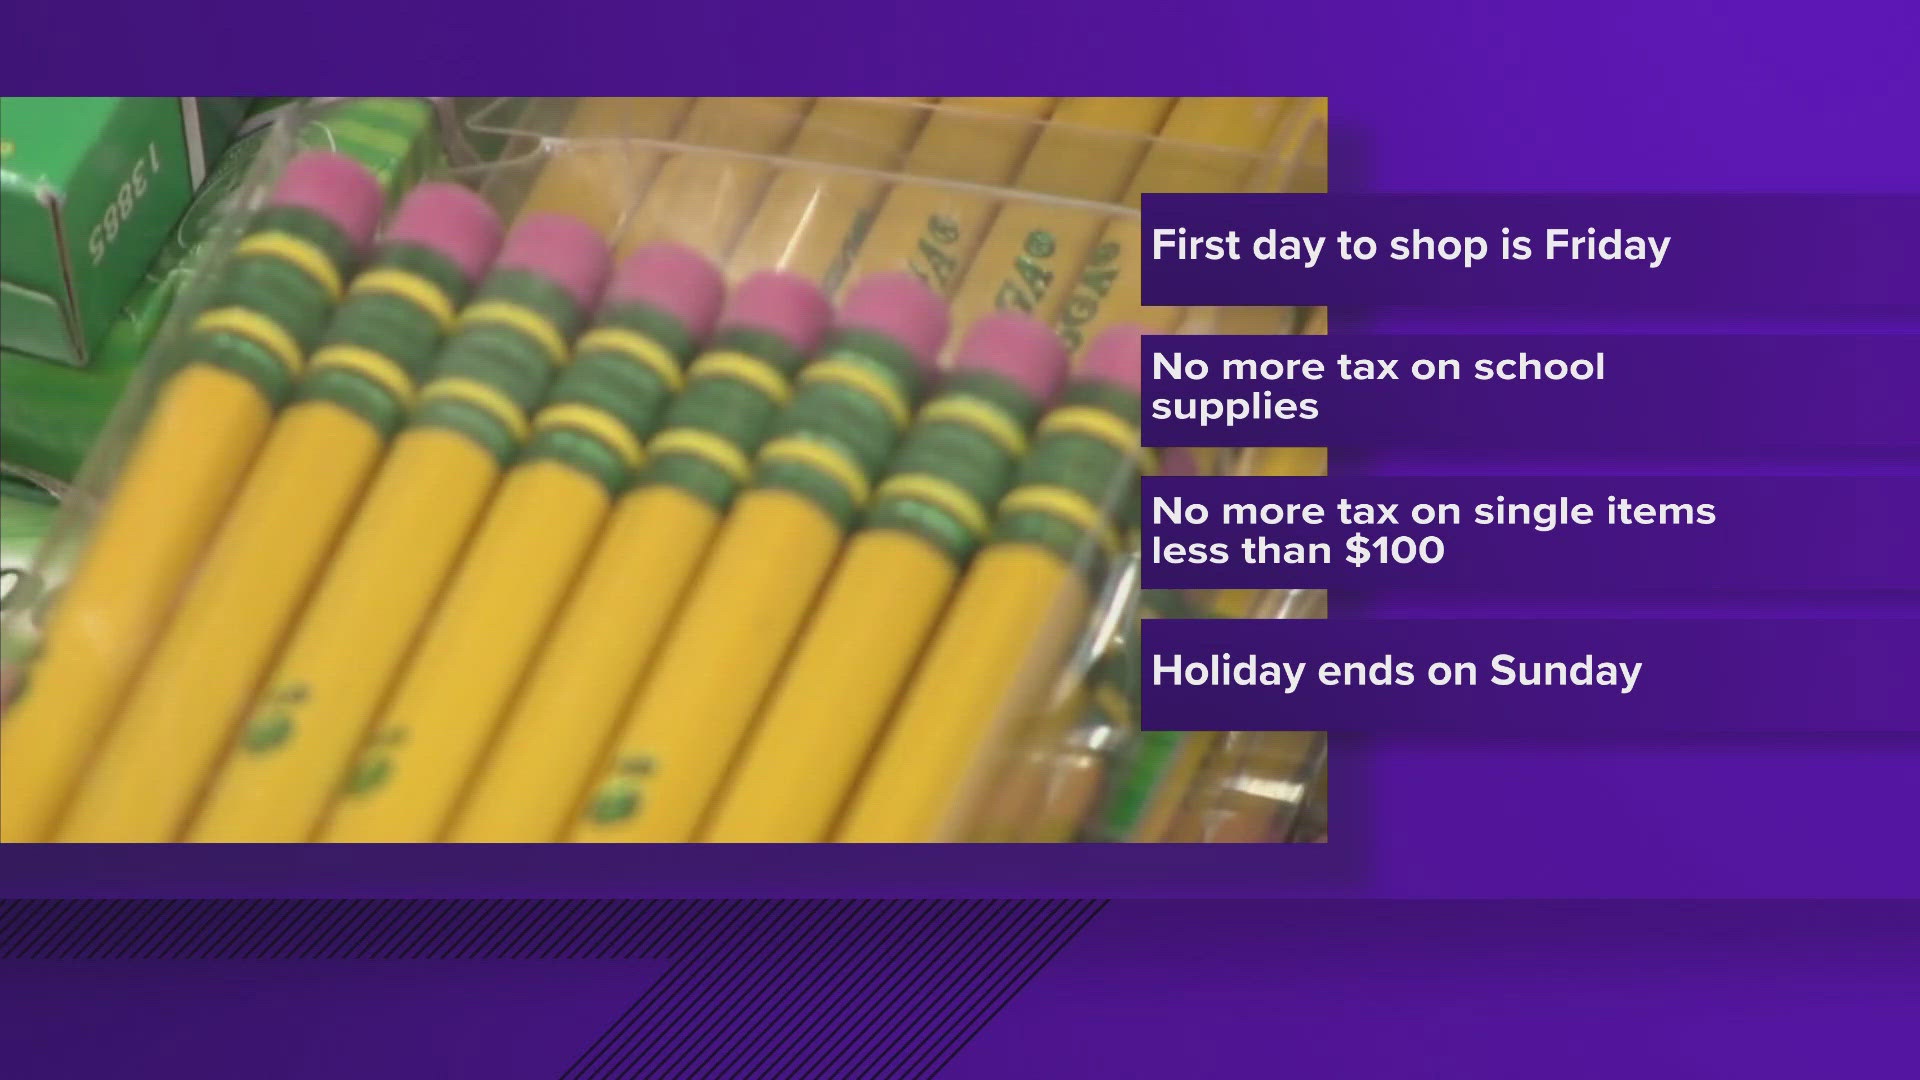 Tax free holiday comes in just in time for back-to-school shooping.